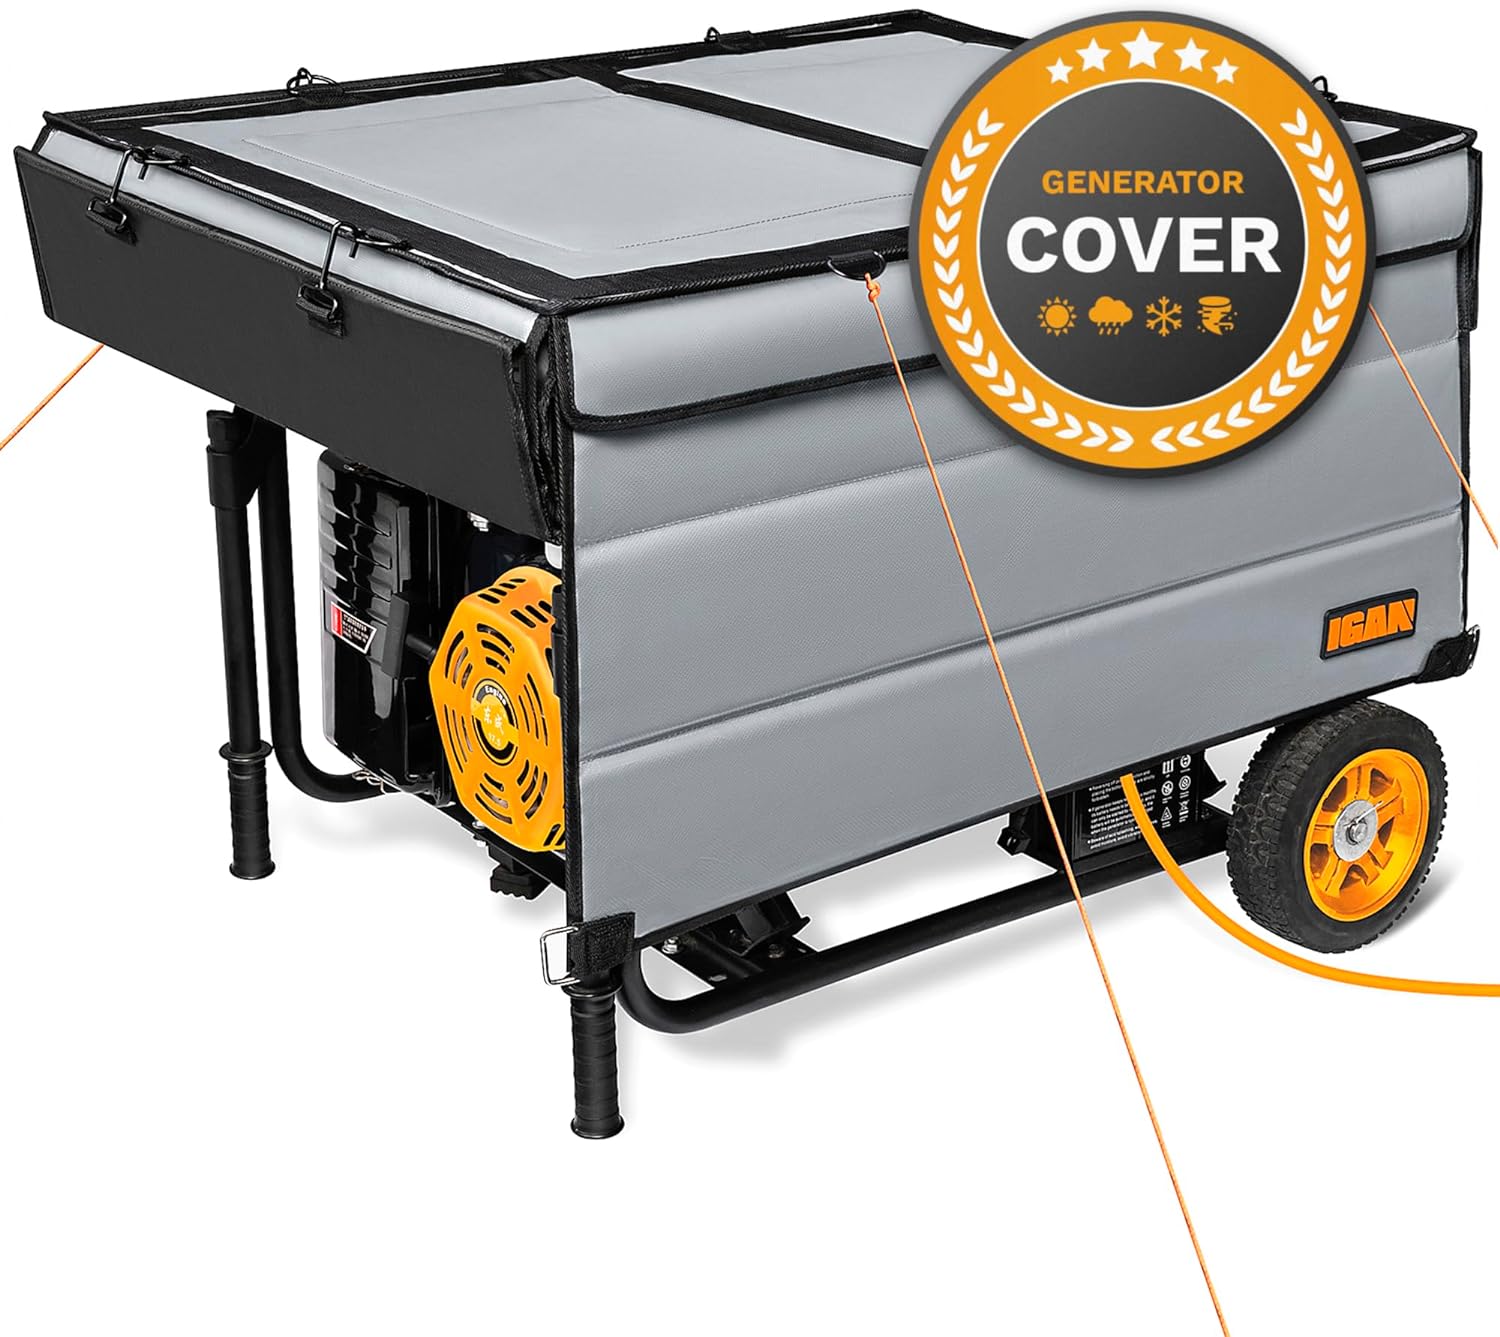 IGAN Generator Tent Running Cover Pro Review